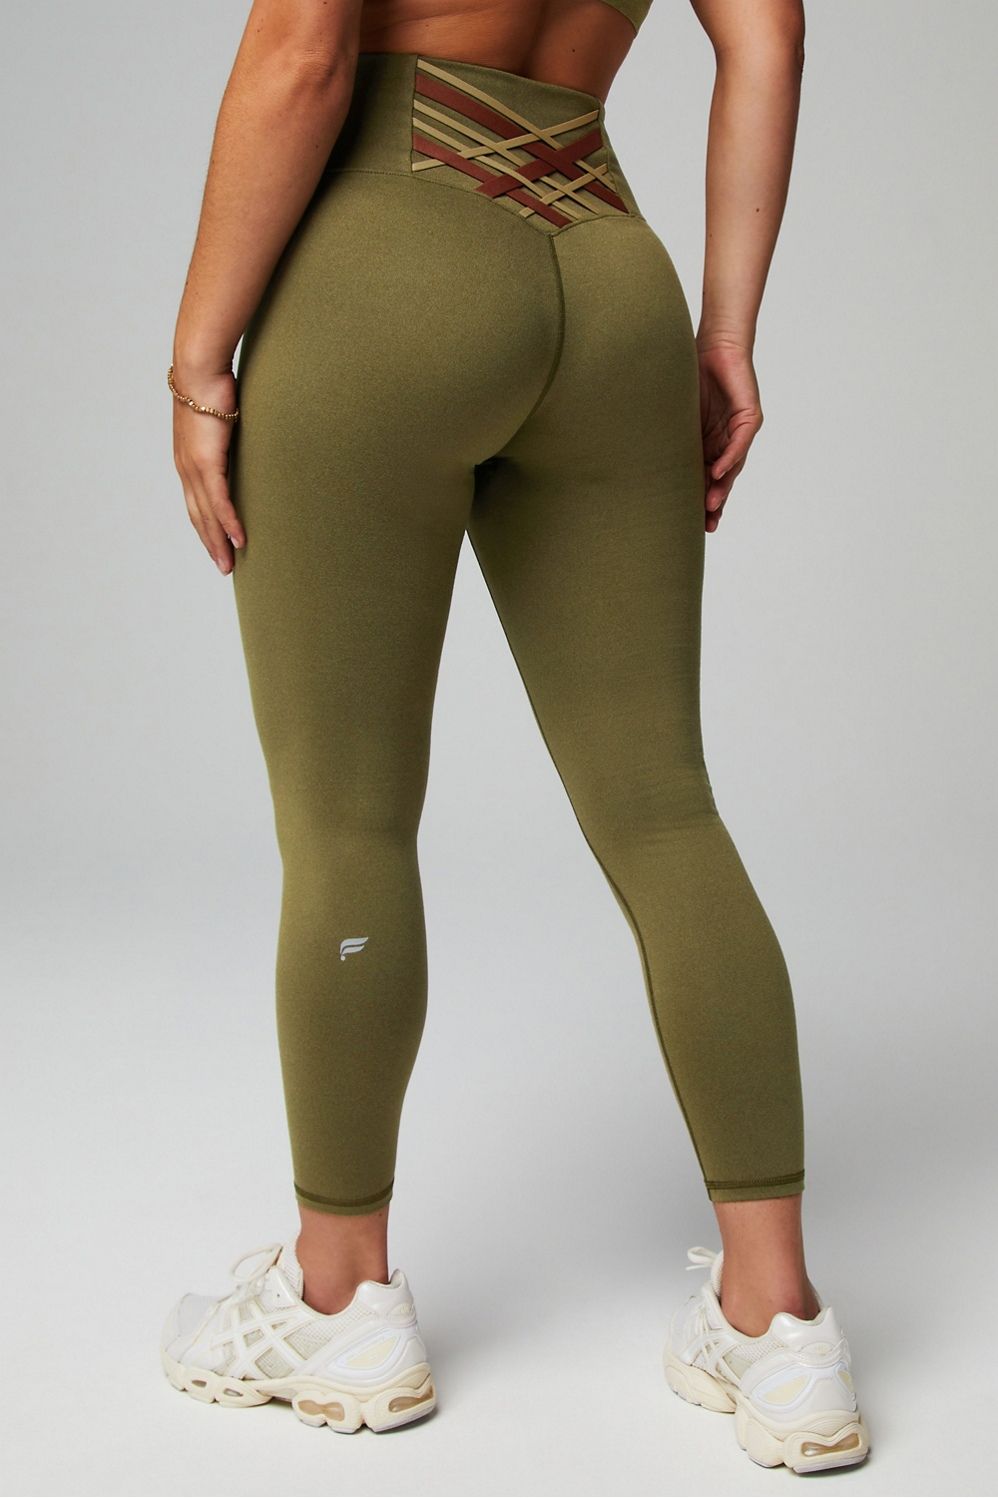 Boost Powerhold® High-Waisted 7/8 Legging | Fabletics - North America